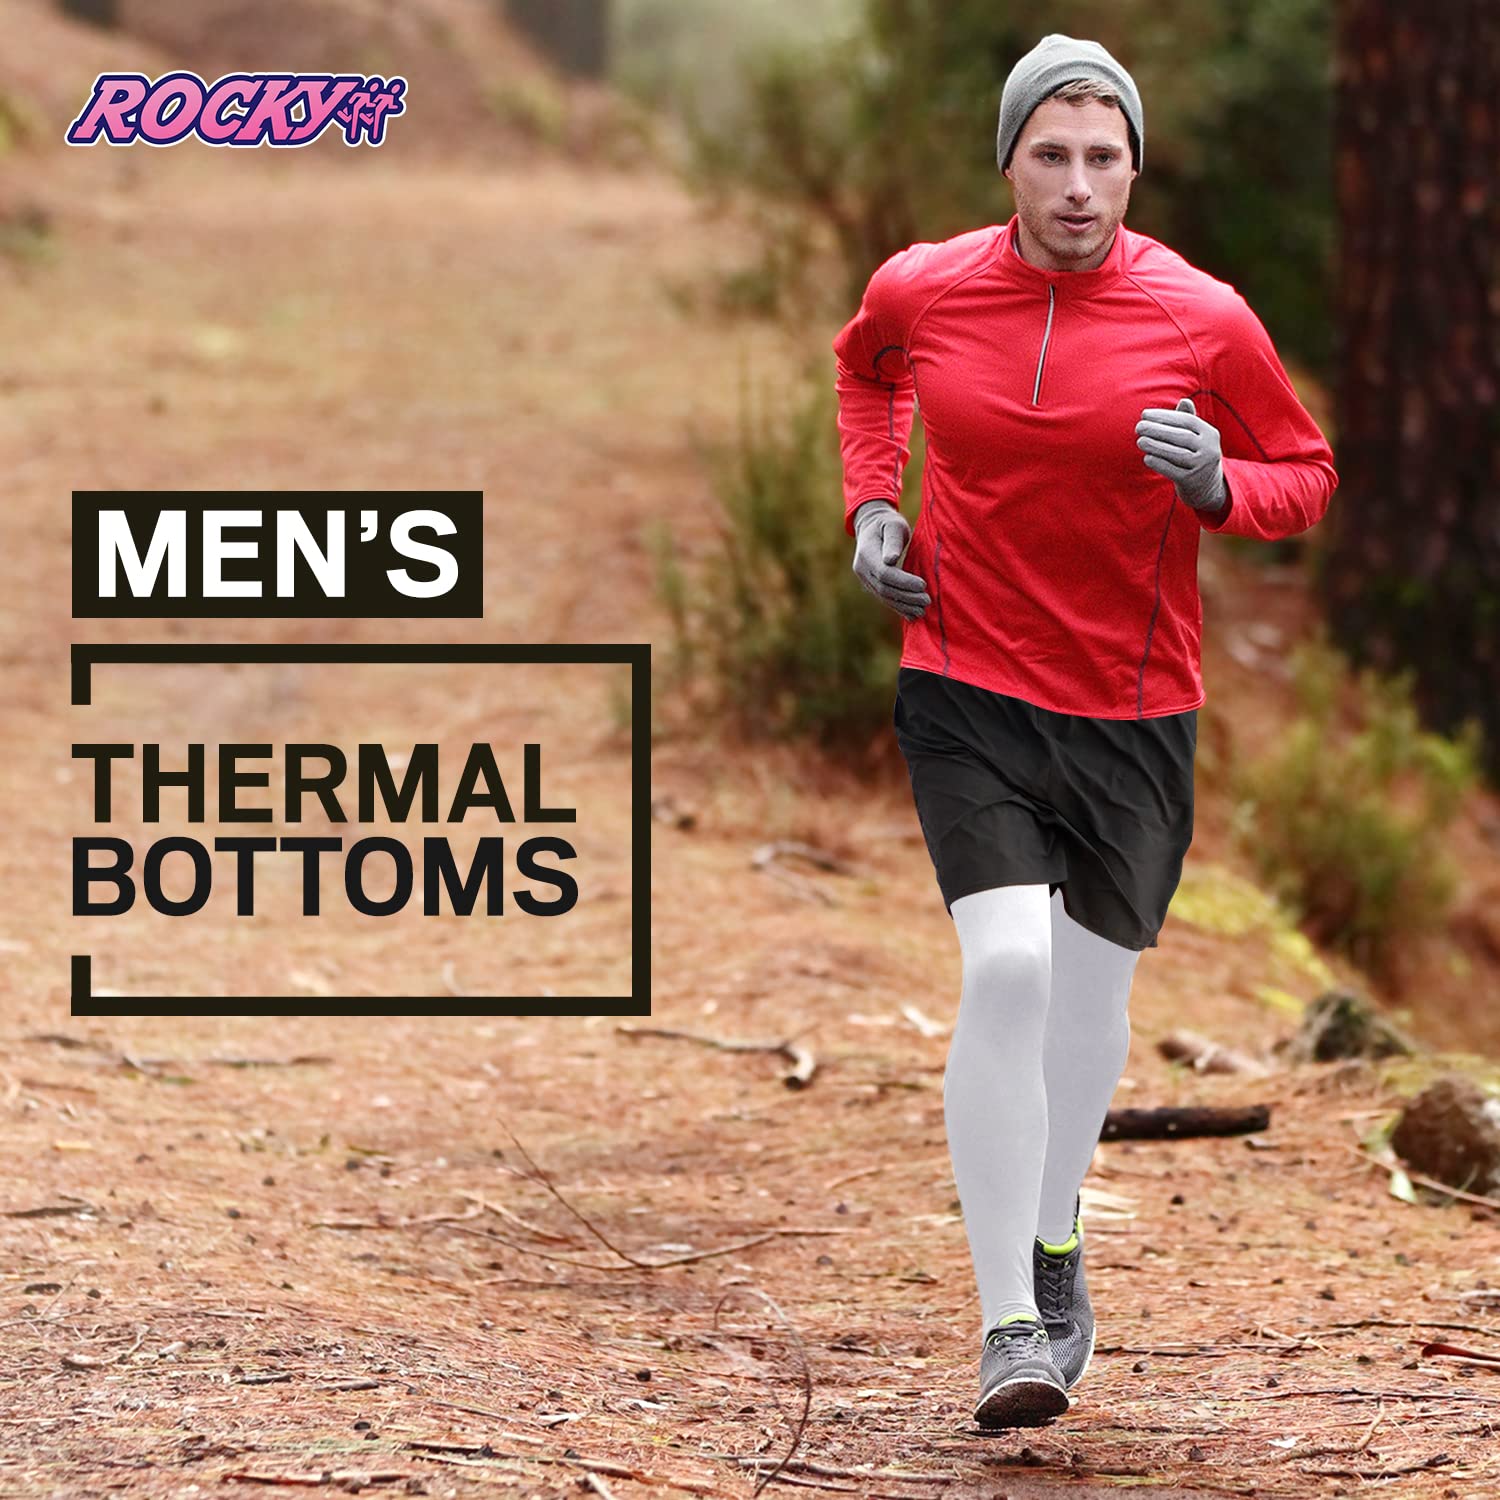 Rocky Men's Thermal Bottoms (Long John Base Layer Underwear Pants) Insulated for Outdoor Ski Warmth/Extreme Cold Pajamas